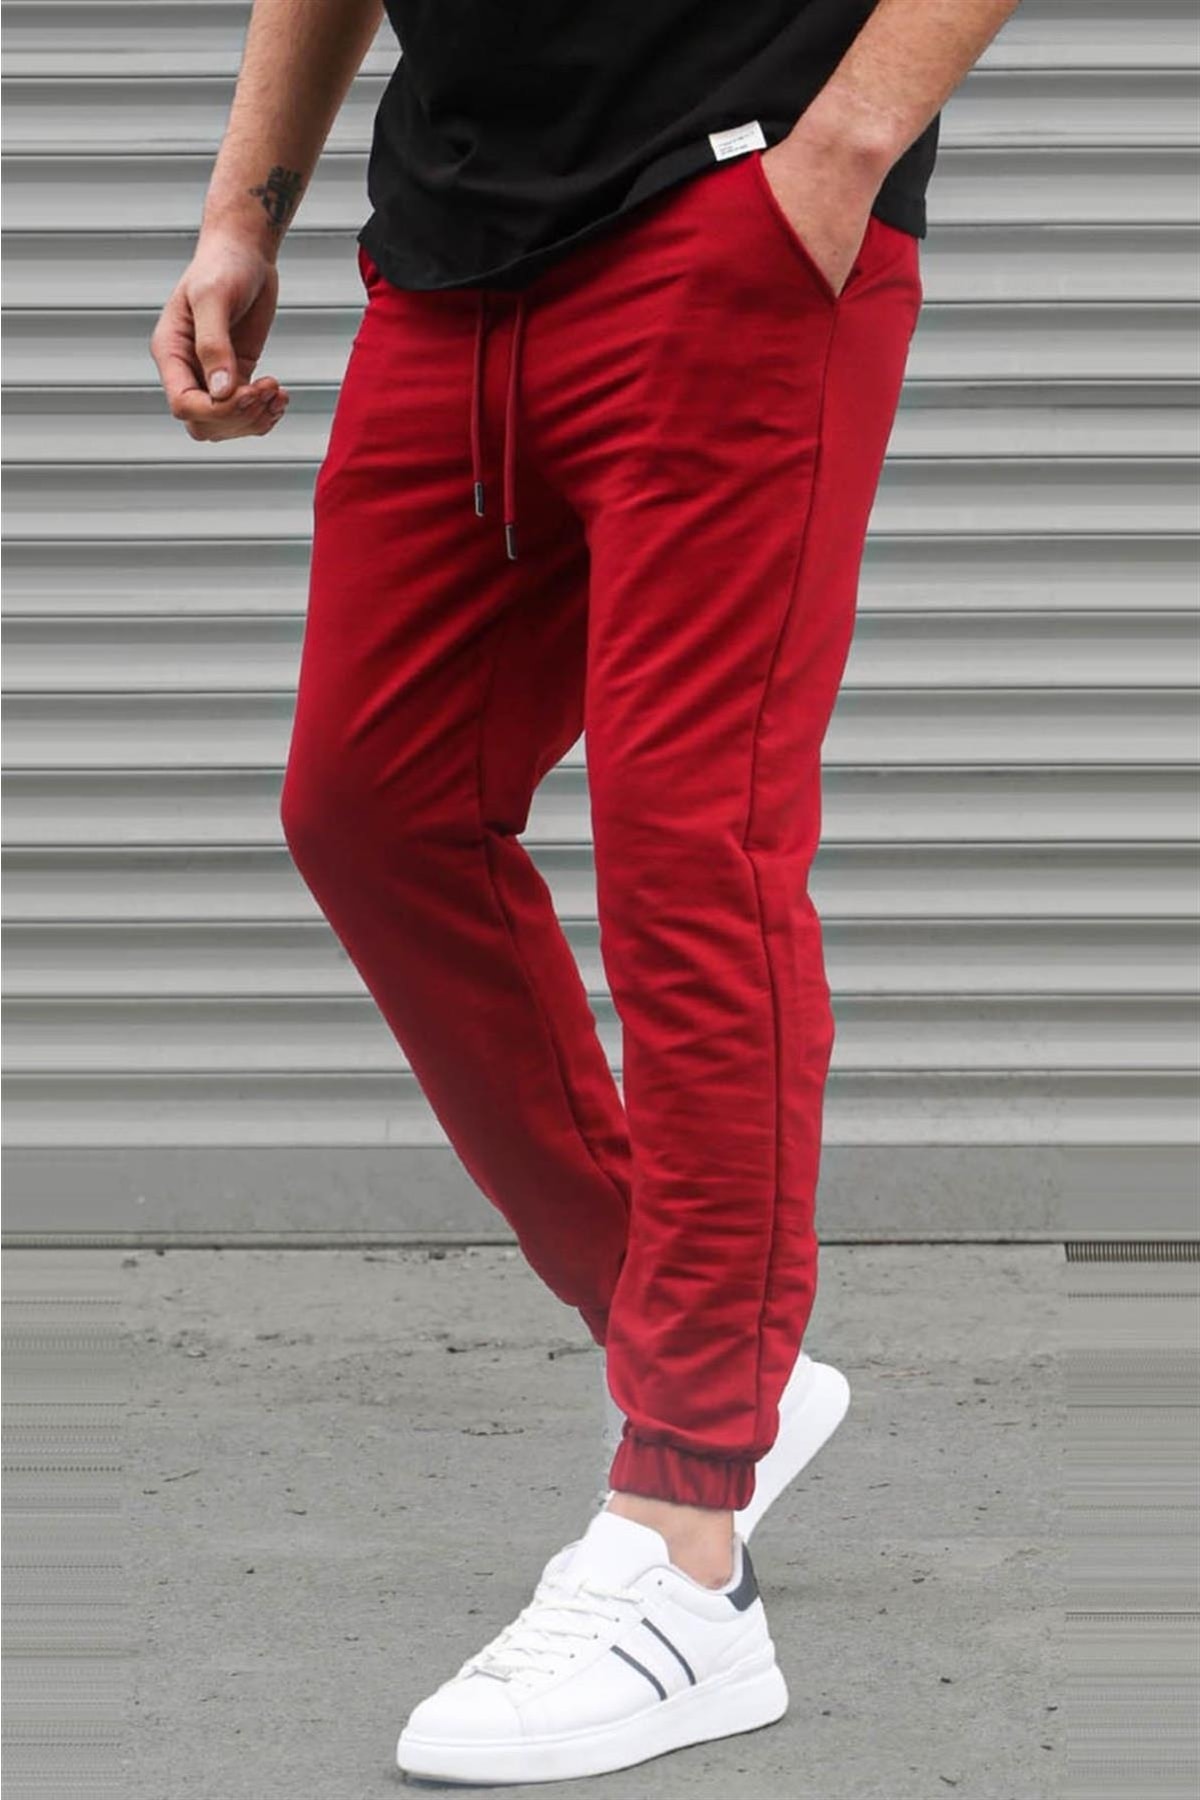 Madmext Maroon Basic Men's Tracksuits With Elastic Legs 5494